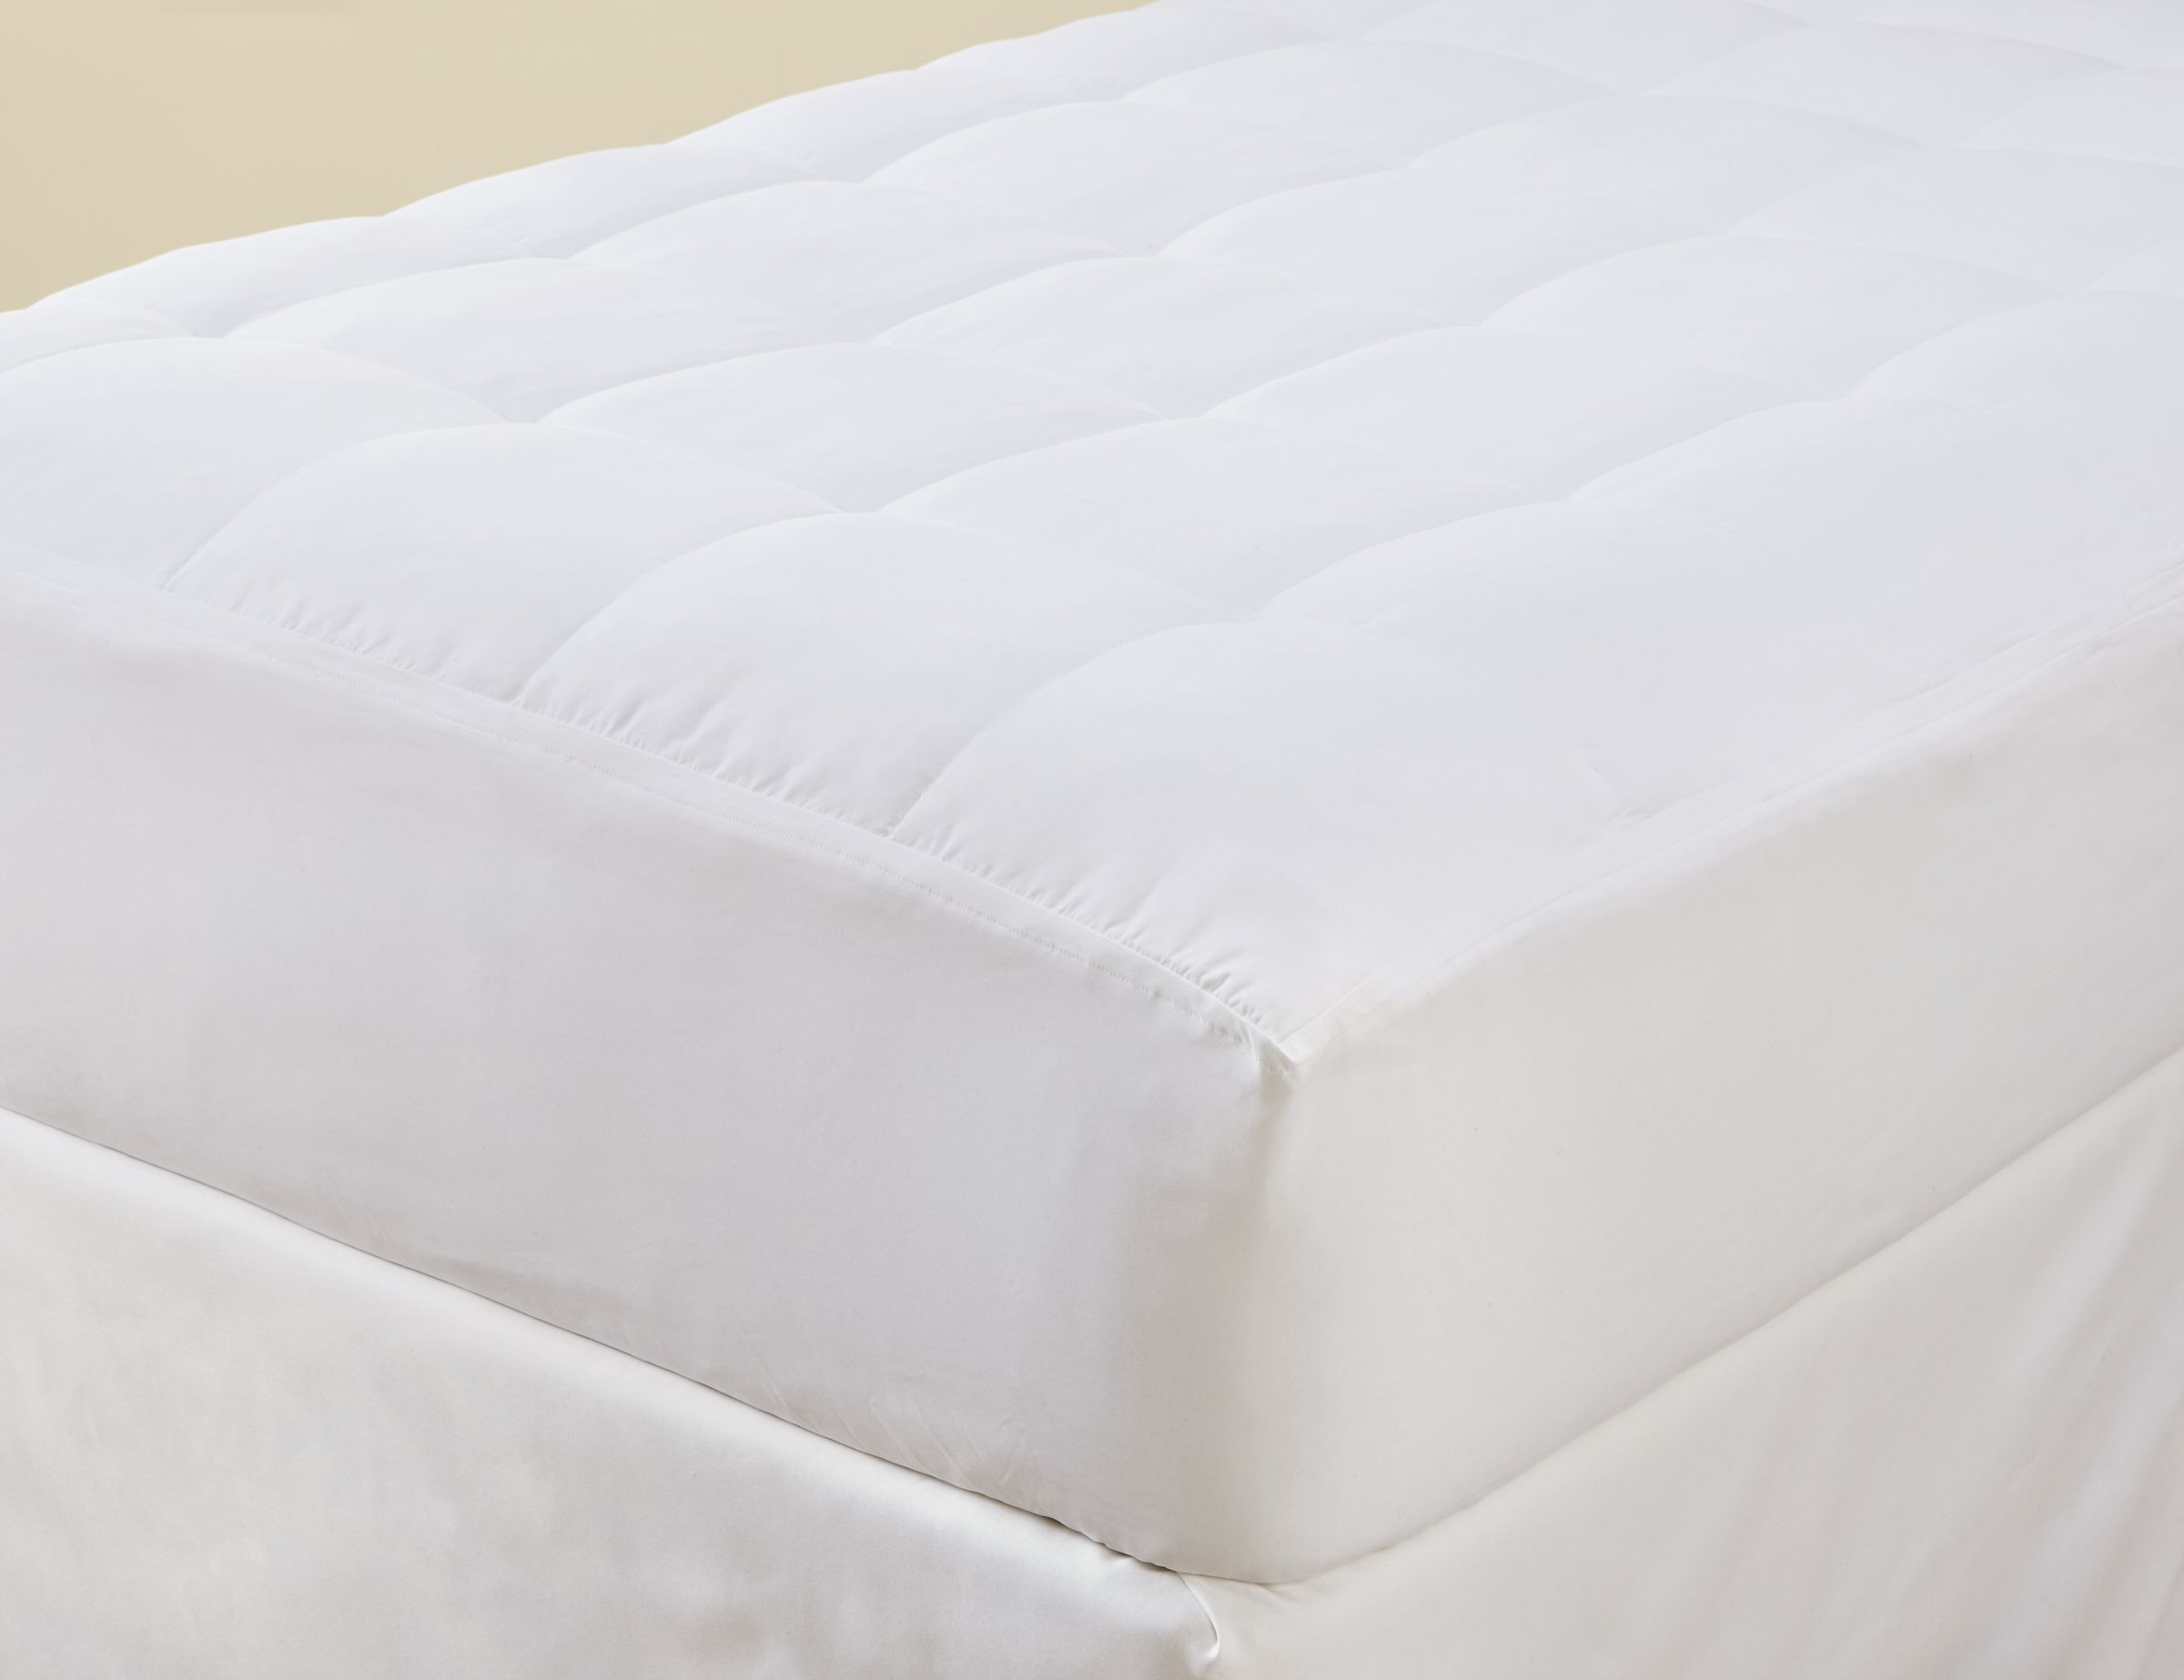 cannon total protection mattress pad reviews